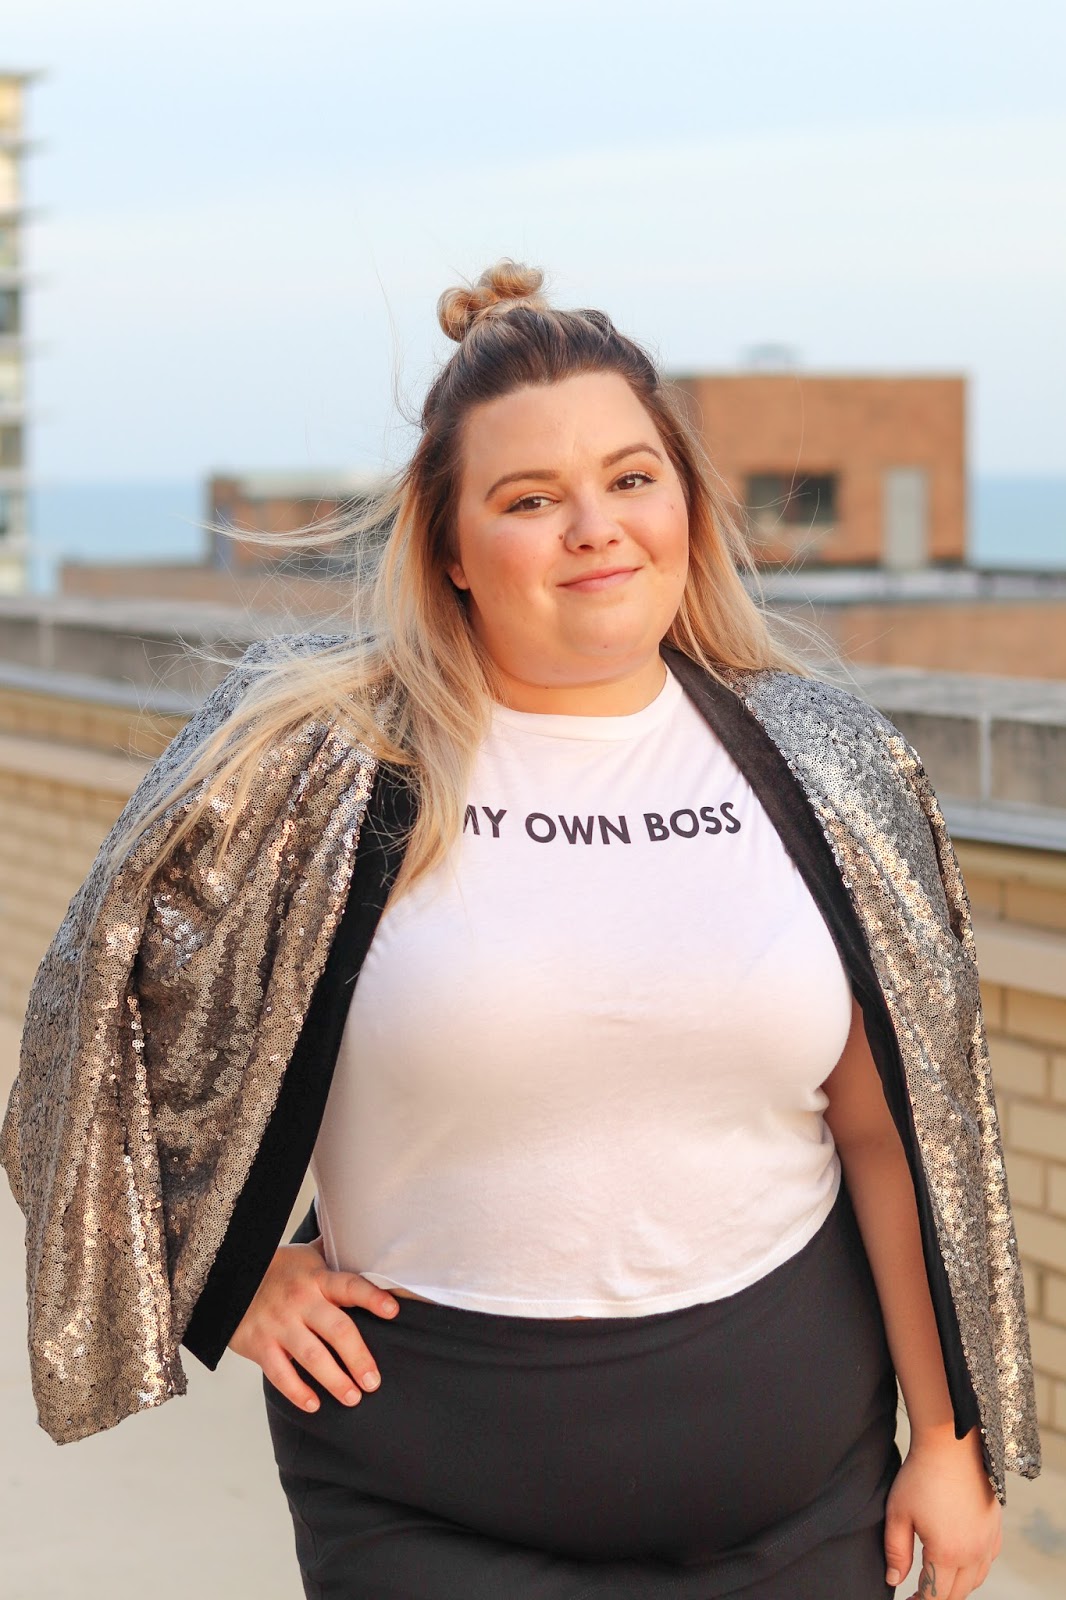 gaining confidence, natalie in the city, chicago fashion blogger, plus size fashion blogger, affordable plus size clothing, plus size fashion, chicago blogger, curves and confidence, fashion nova curve, fashion nova, fatshion, plus size crop tops